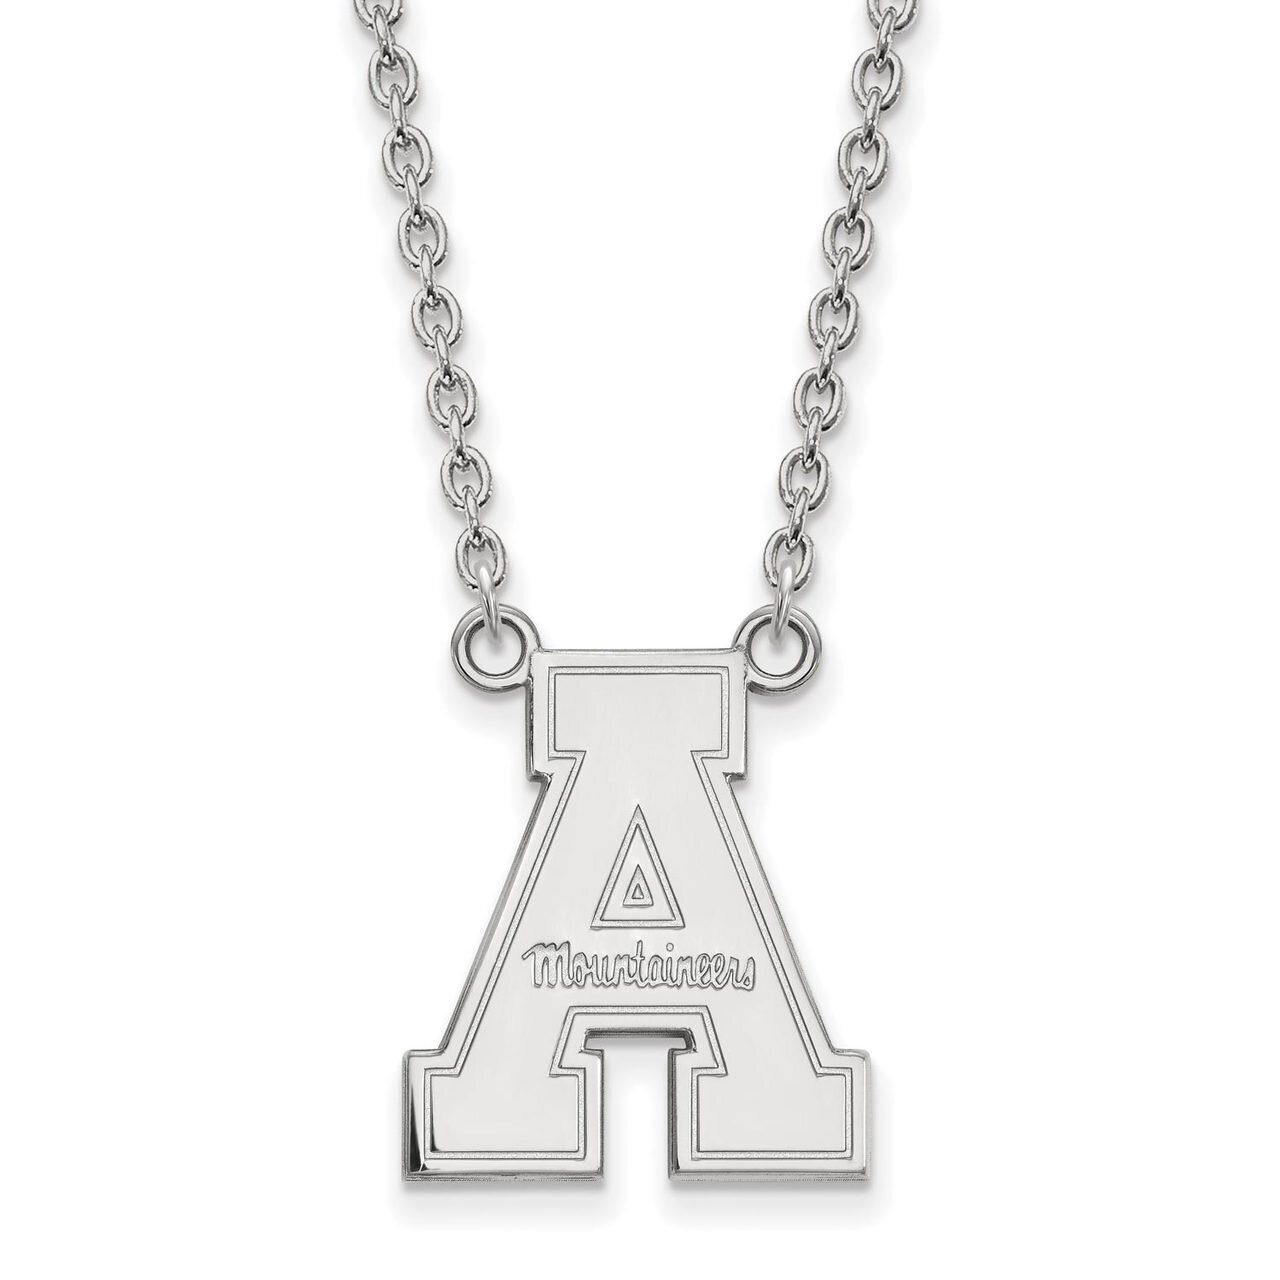 Appalachian State University Large Pendant with Chain Necklace 10k White Gold 1W012APS-18